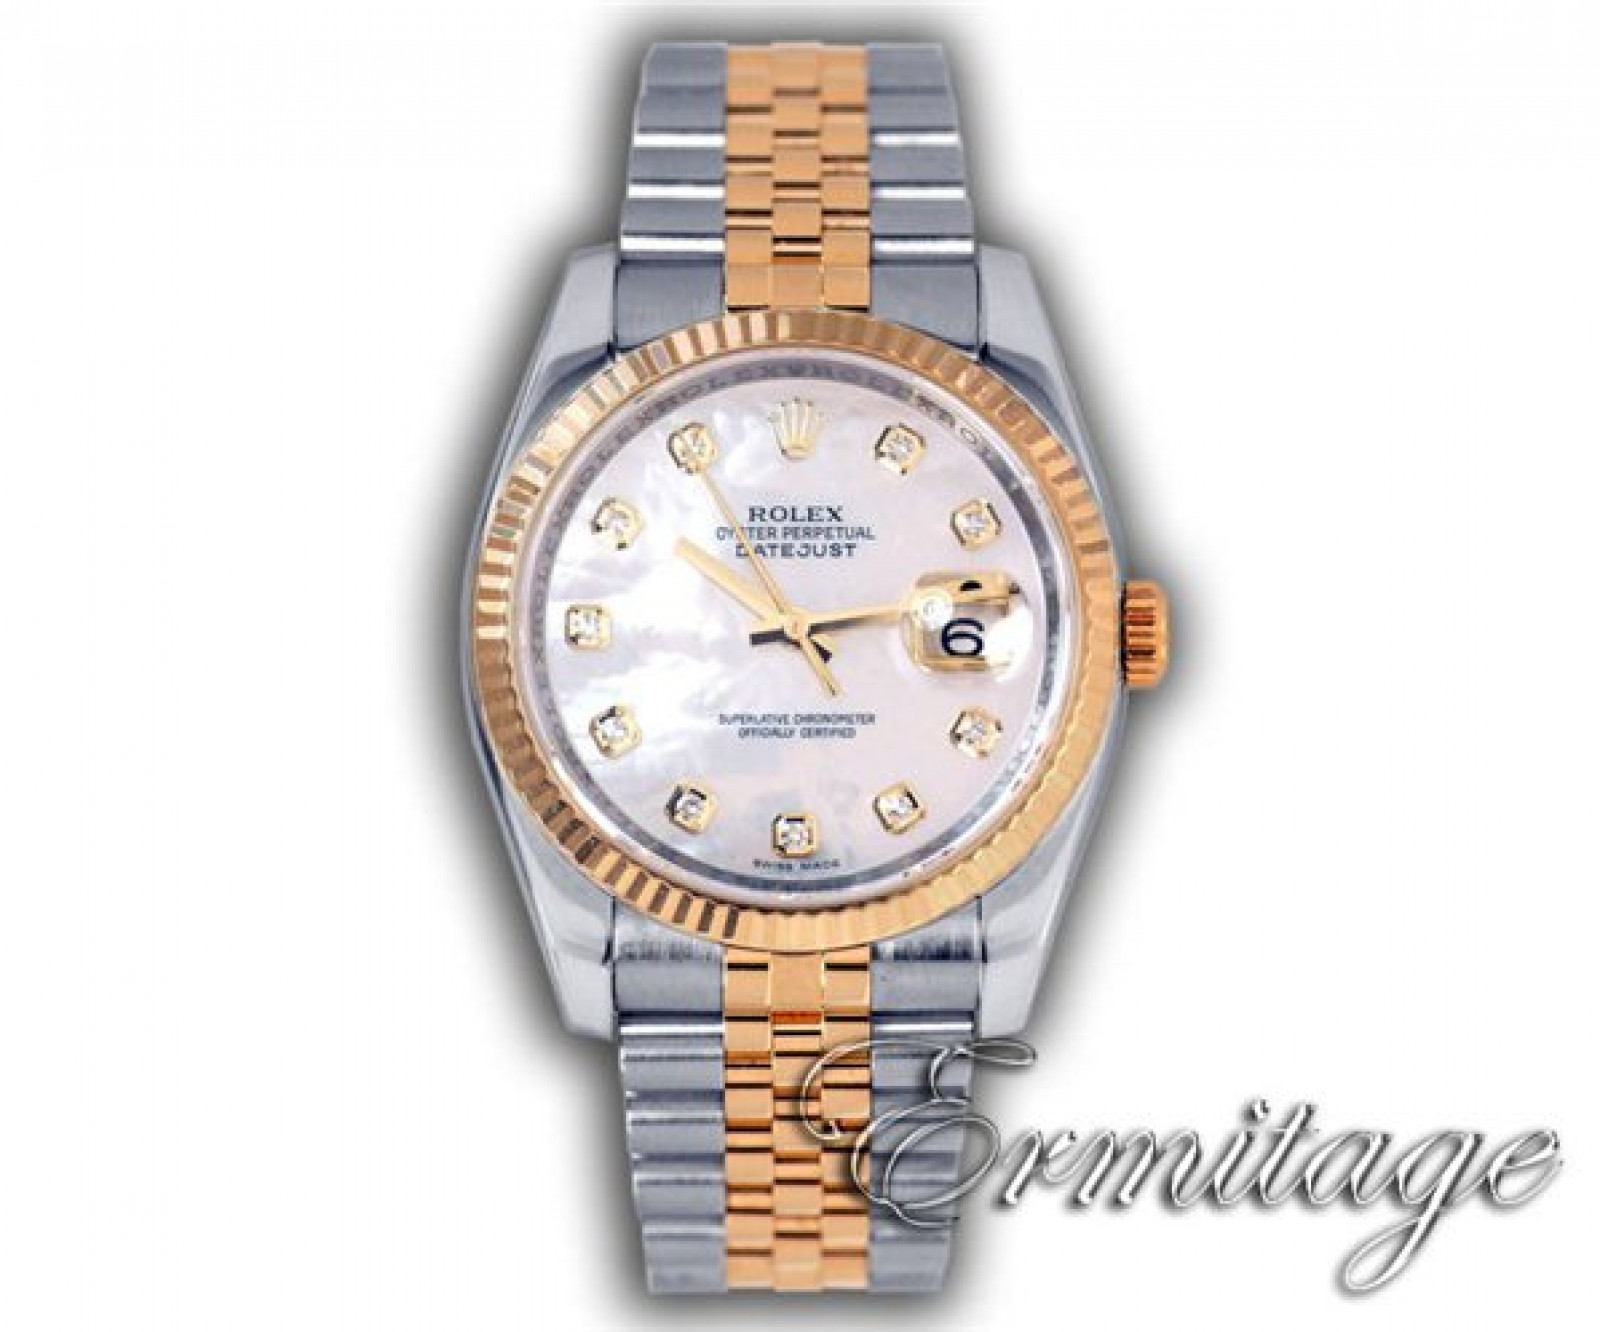 Pre-Owned Rolex Datejust 116233 with Diamonds